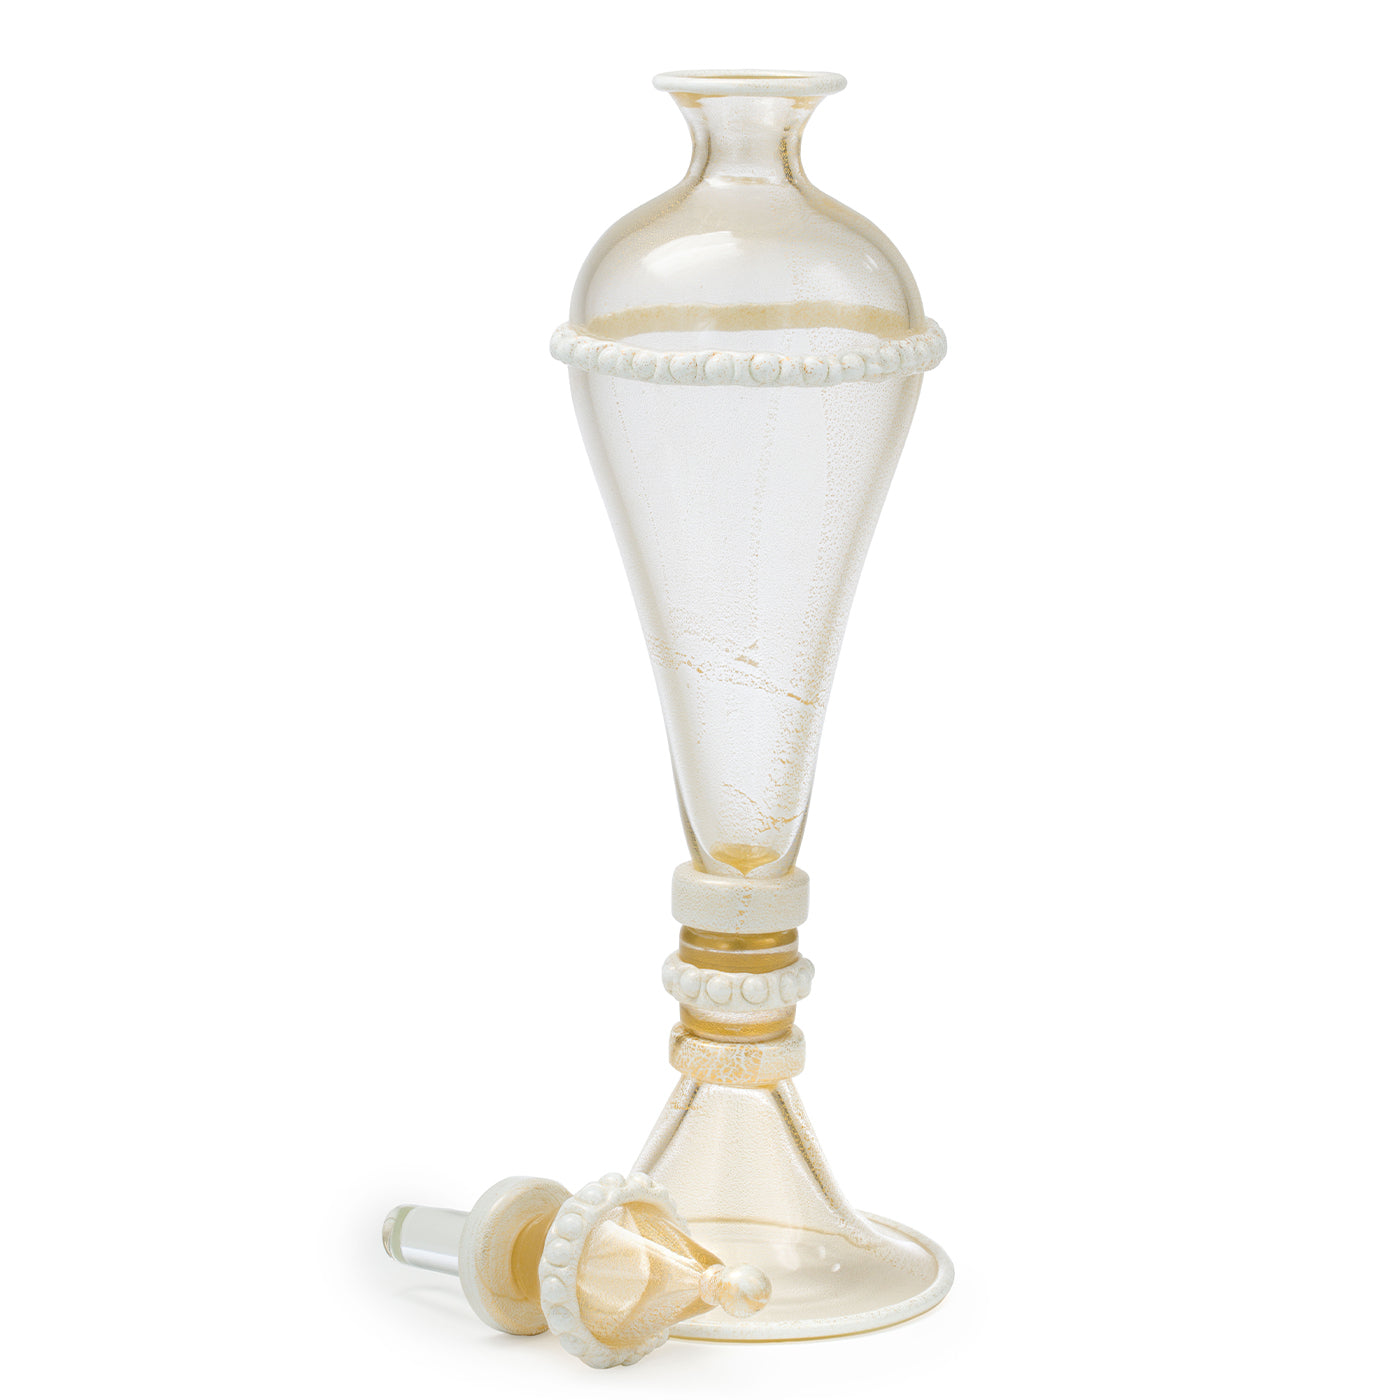 Stmat 24K White & Gold Footed Vase with Lid - Alternative view 2